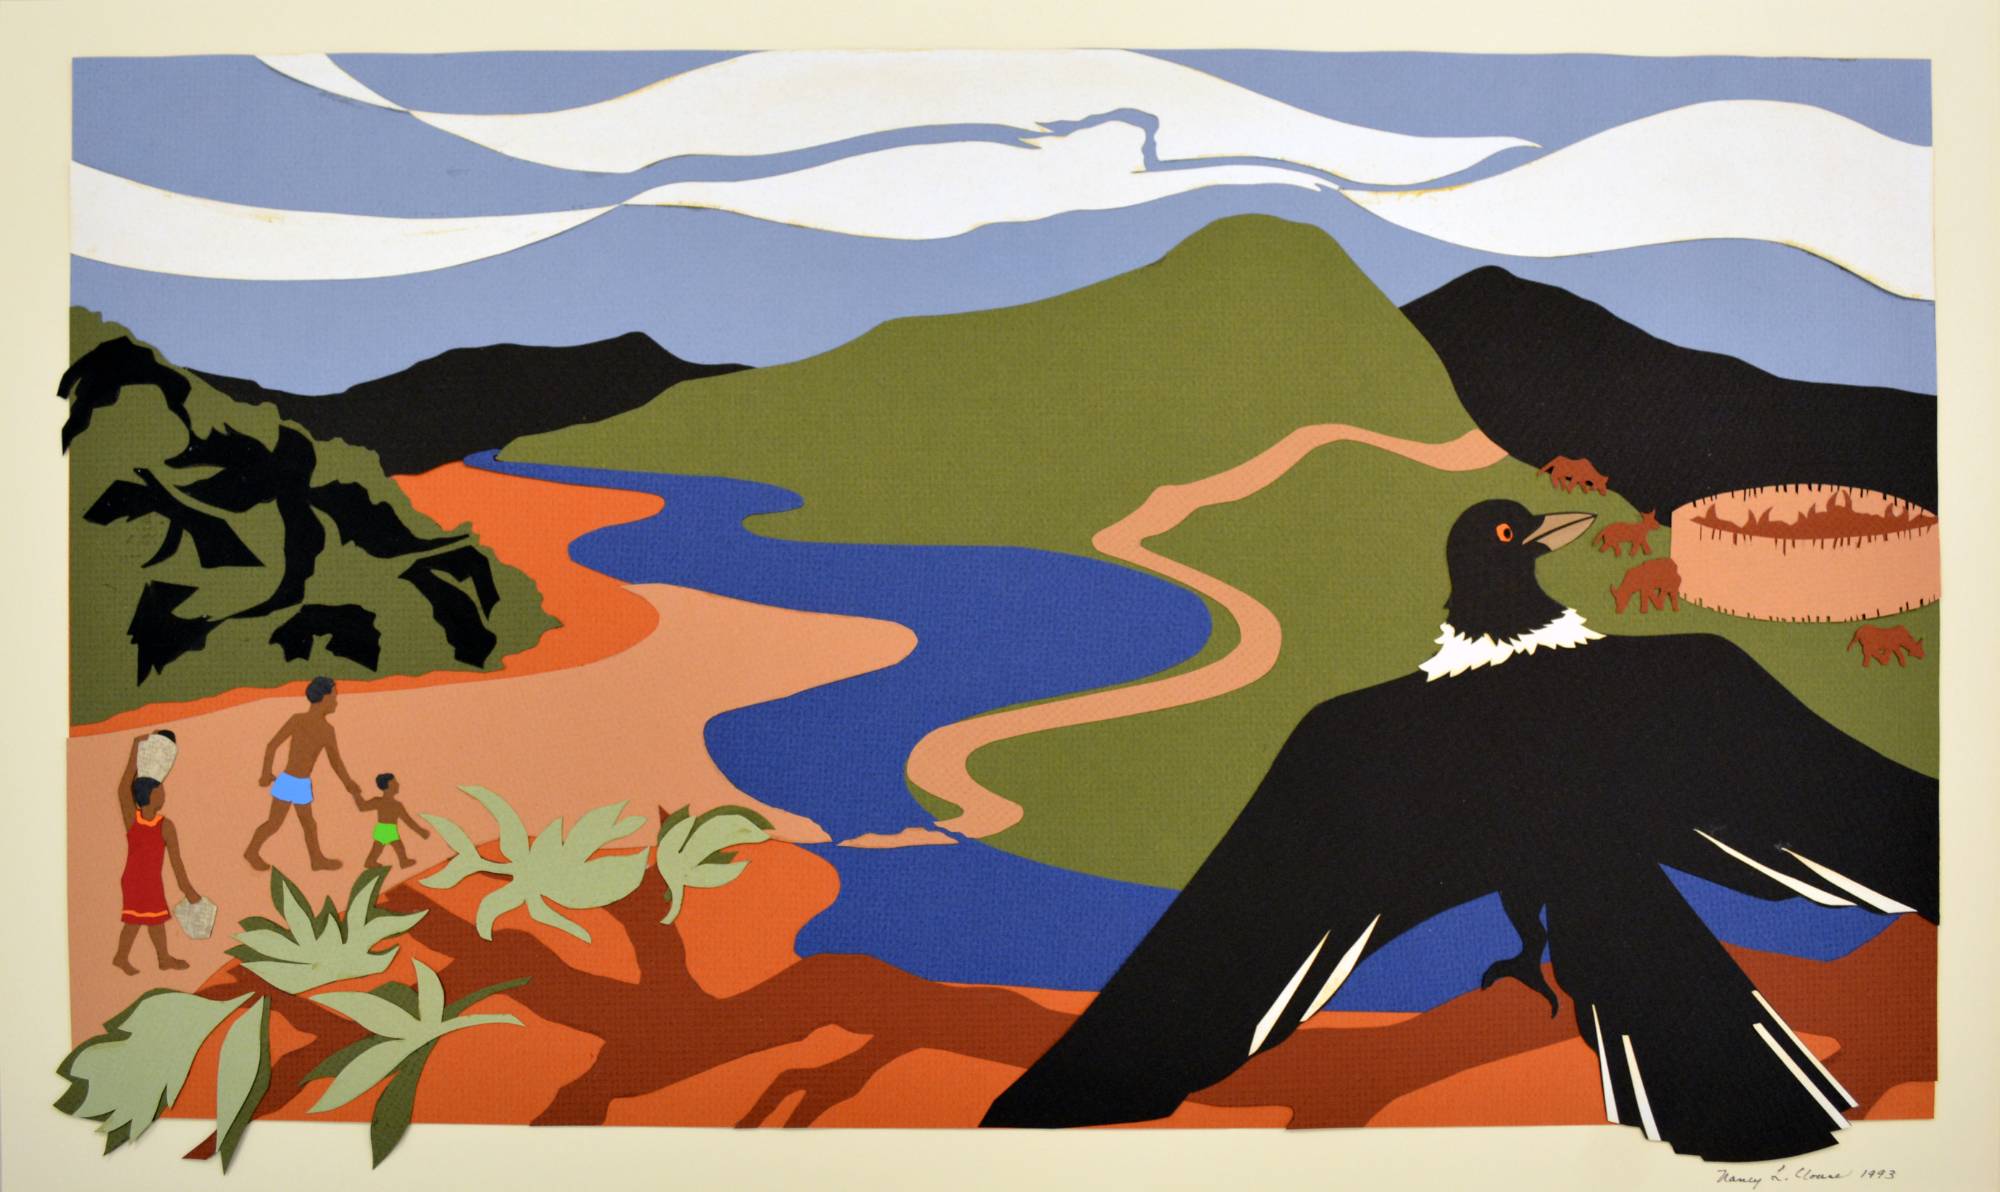 abstract collaged landscape with indigenous people in background and black bird in foreground